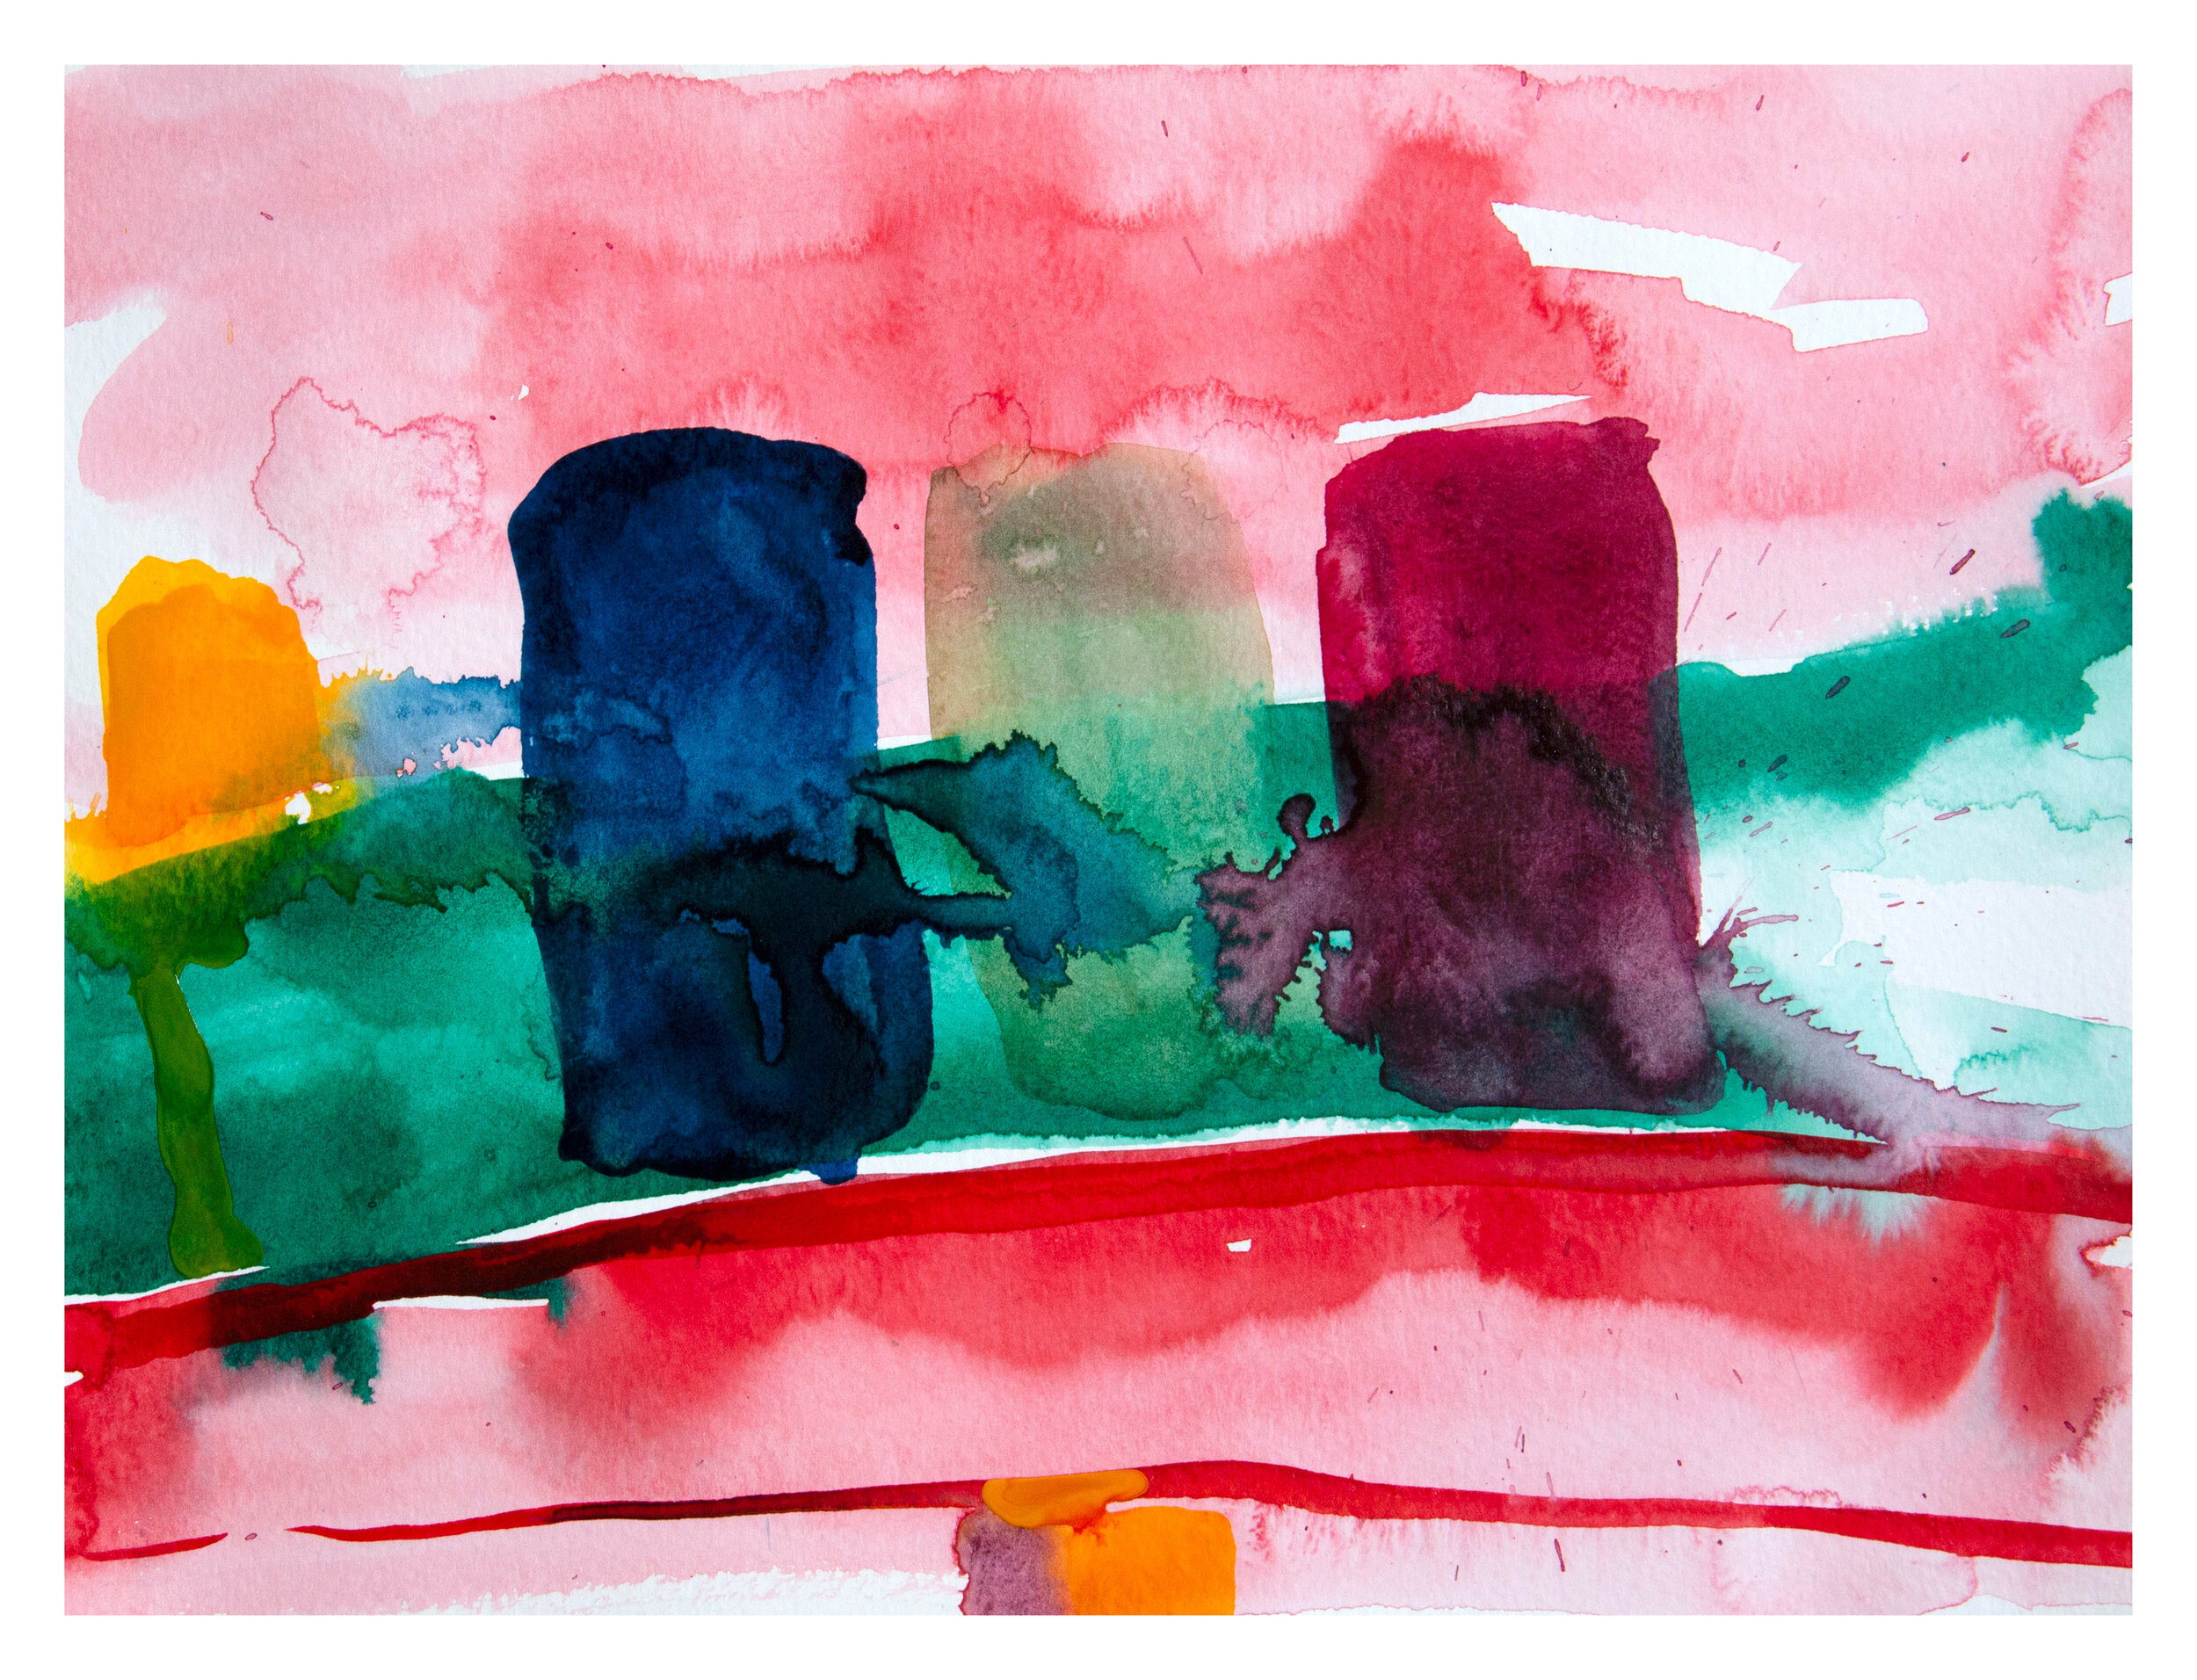 100 Watercolors for Spring (#68)